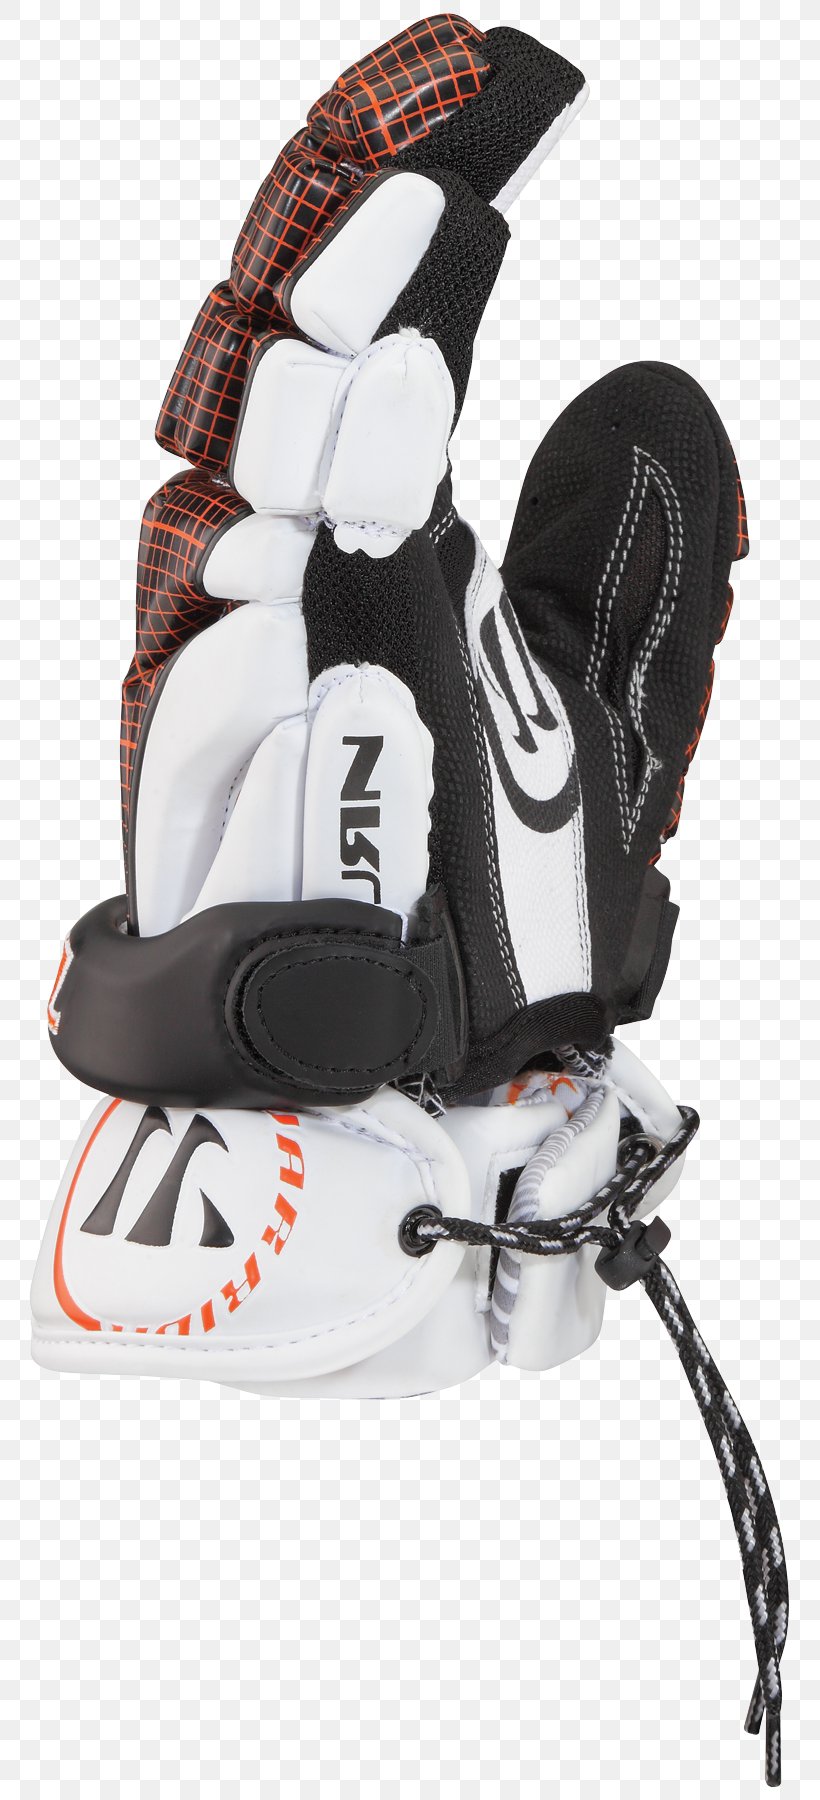 Lacrosse Glove Clothing Accessories Cross-training Sporting Goods, PNG, 777x1800px, Lacrosse Glove, Baseball, Baseball Equipment, Clothing Accessories, Cross Training Shoe Download Free